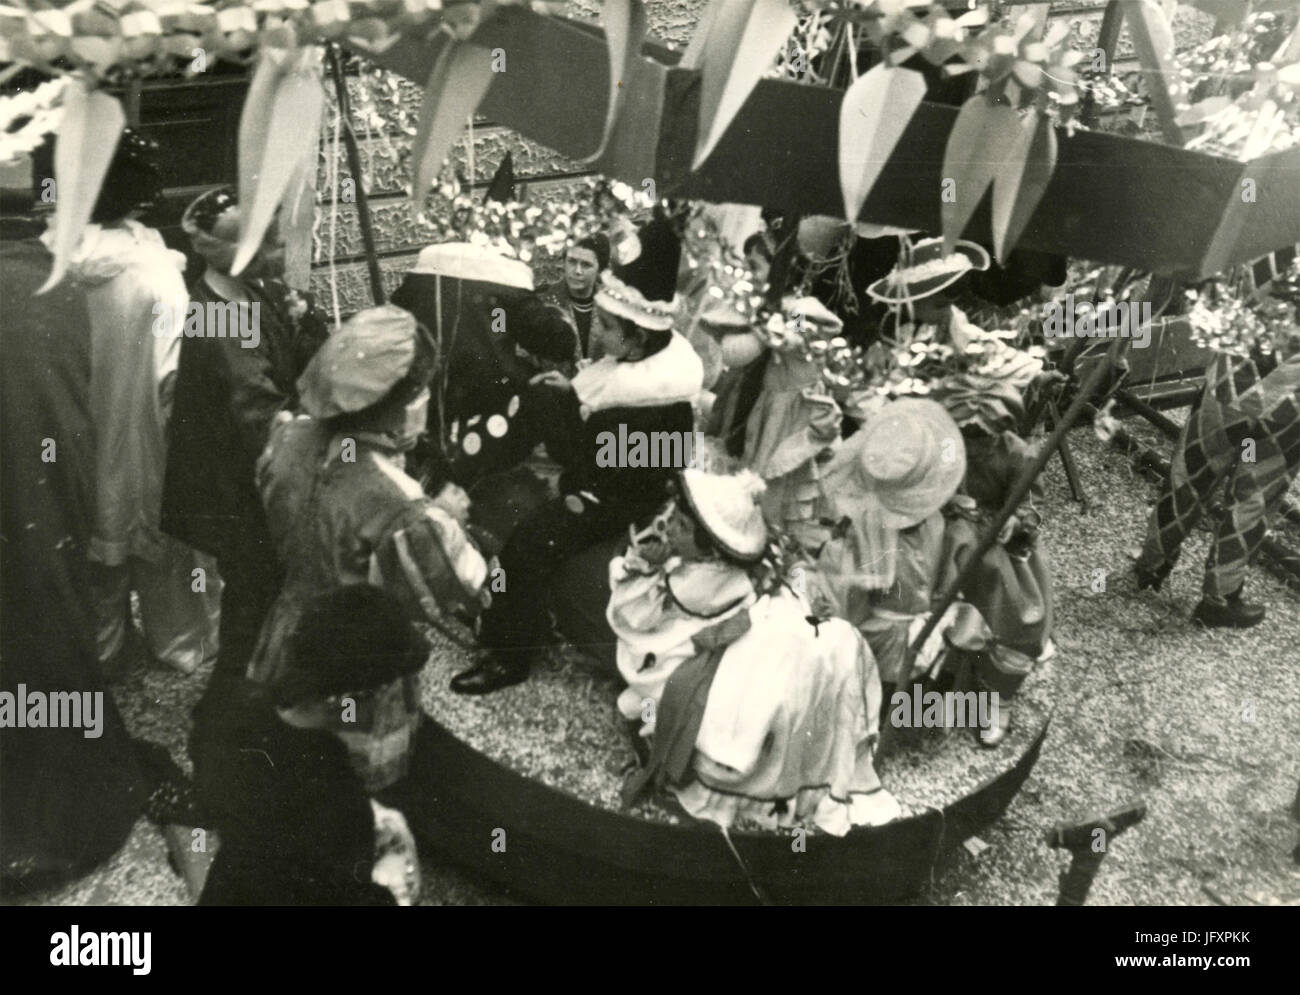 Parade of allegorical wagons, Rieti Carneval 1960, Italy Stock Photo